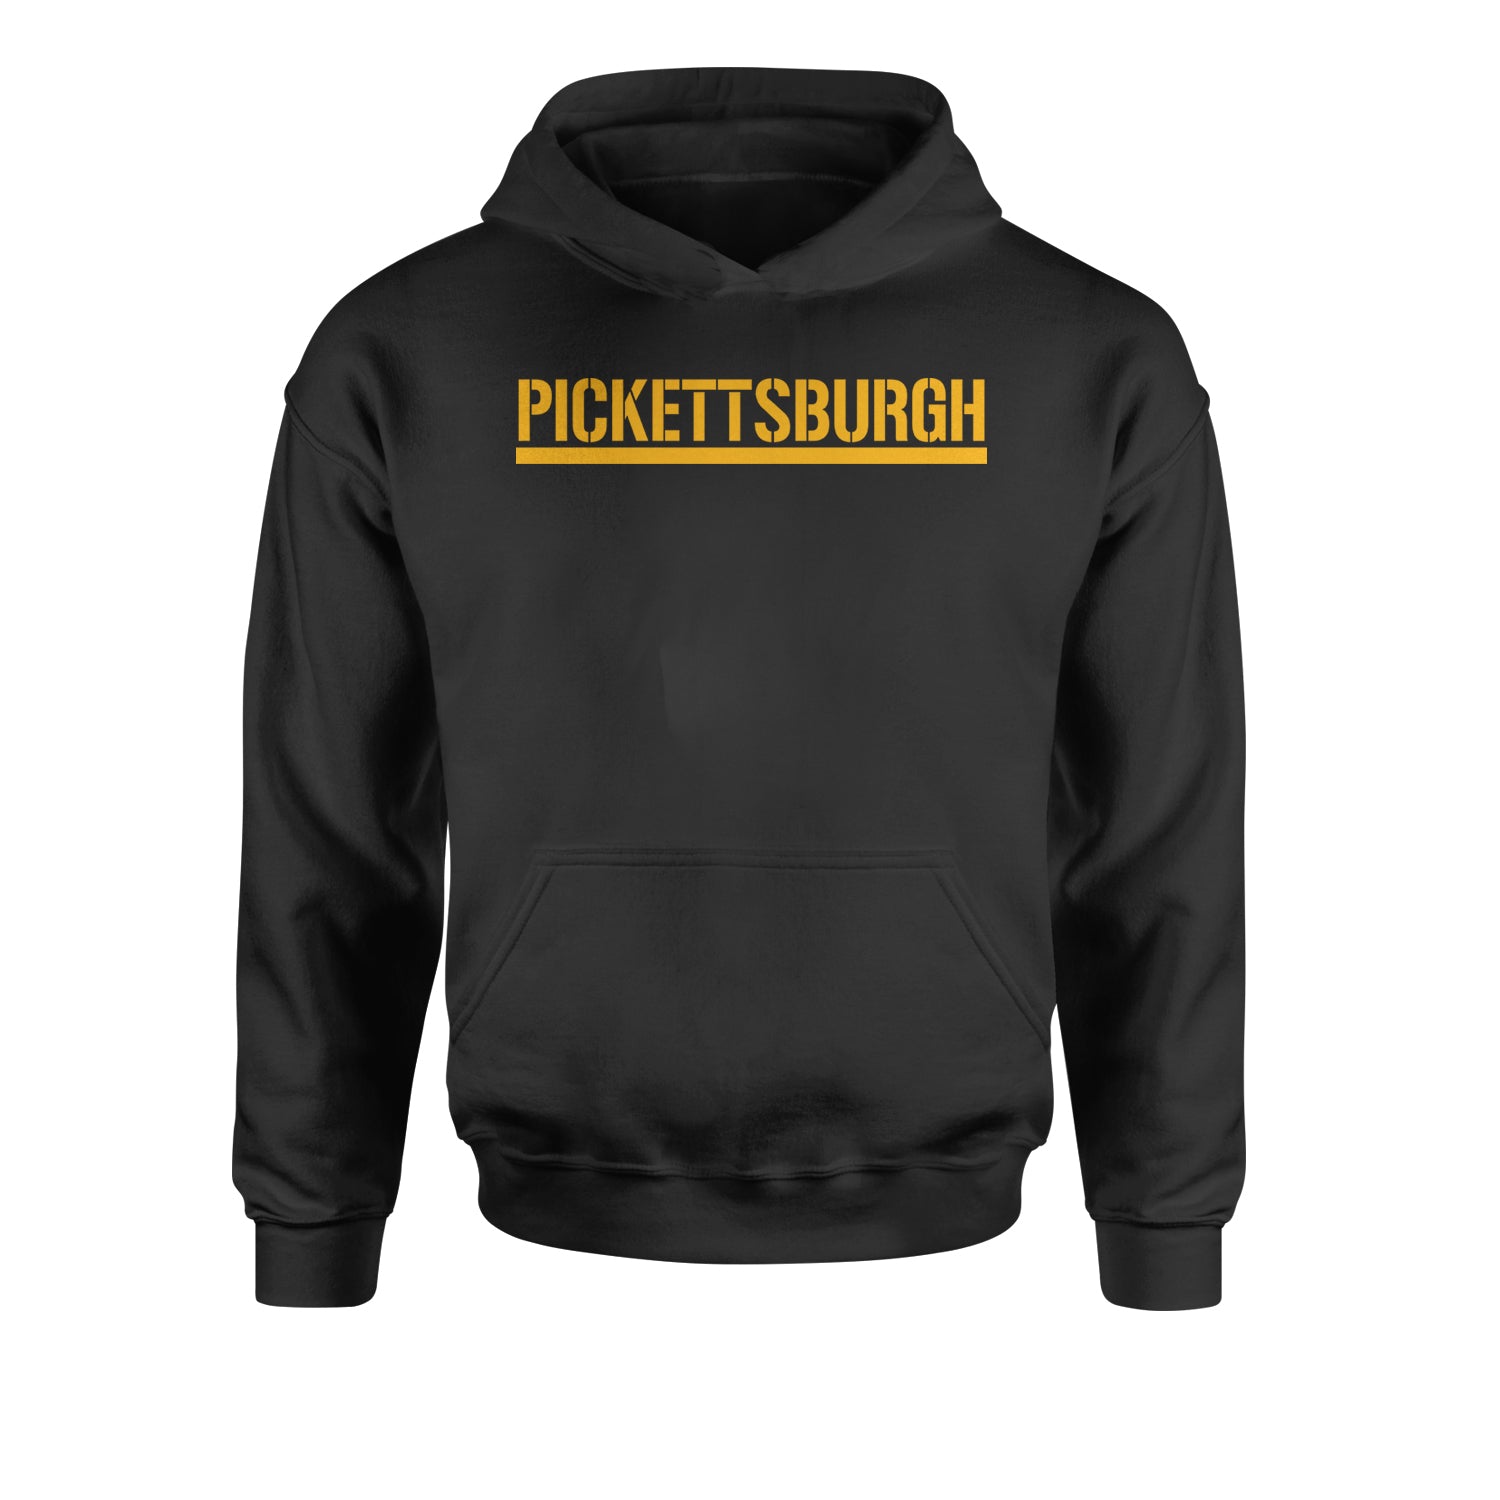 Pickettsburgh Pittsburgh Football Youth-Sized Hoodie apparel, city, clothing, curtain, football, iron, jersey, nation, pennsylvania, steel, steeler by Expression Tees